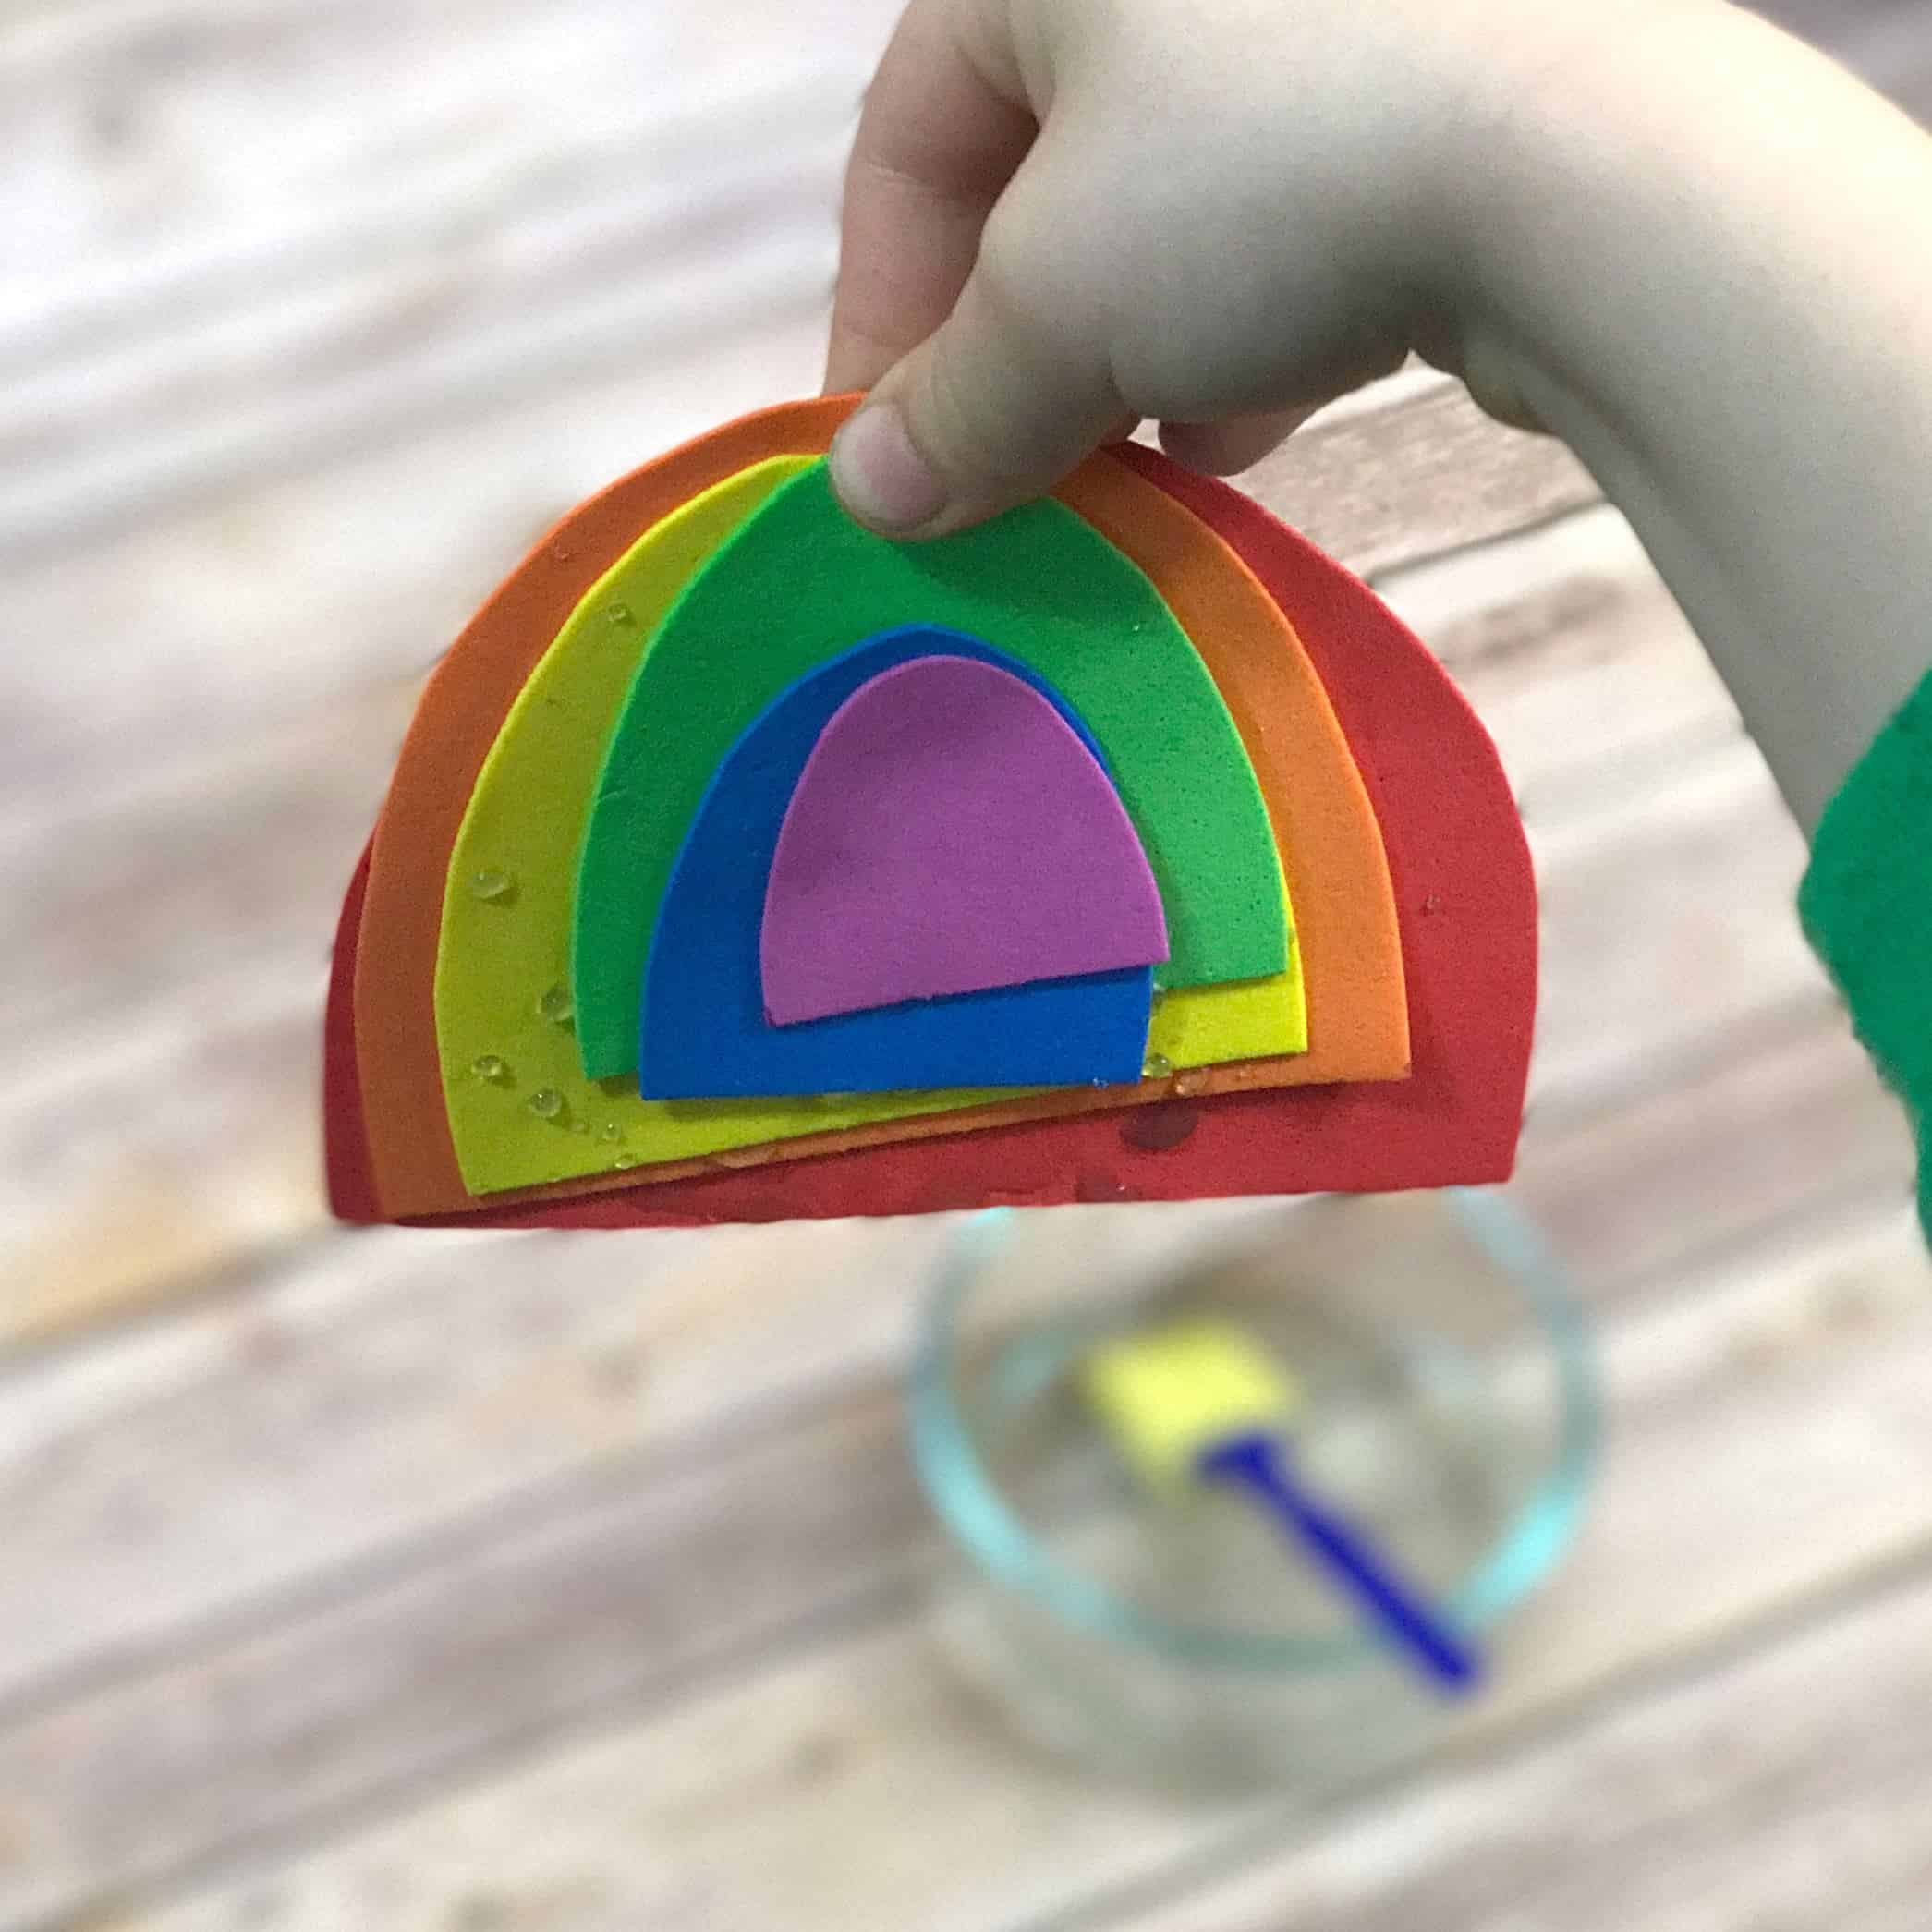 These rainbow busy bags are all made from craft foam bought in bulk at the Dollar Tree! Great for keeping kids entertained and practicing fine motor skills!